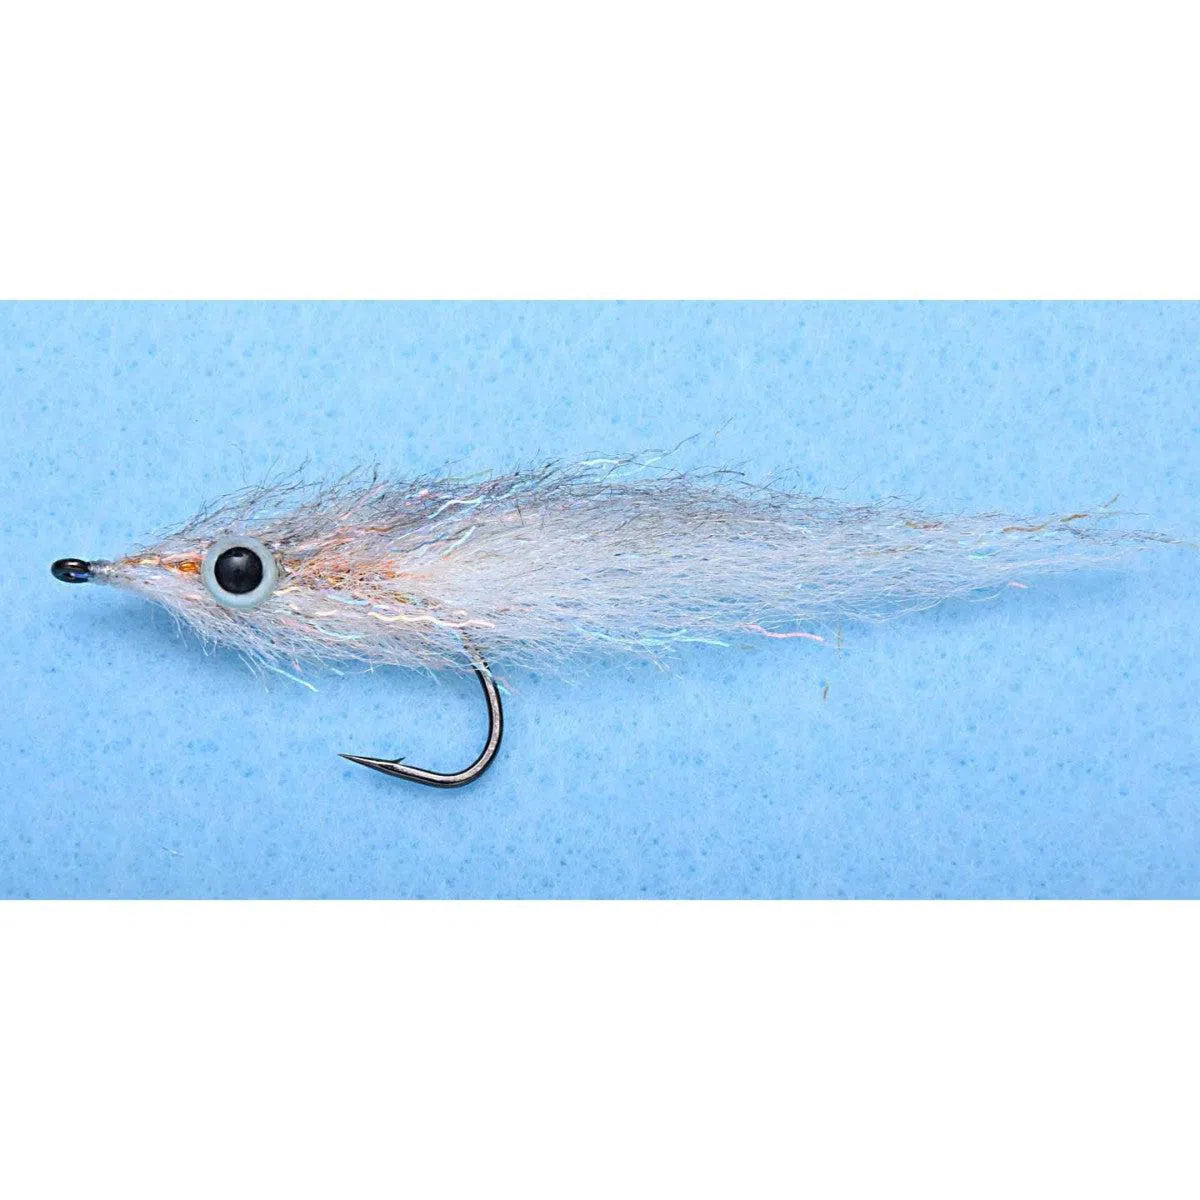 Enrico Puglisi Ghost Minnow Fly-Lure - Fly-Enrico Puglisi-Grey-Size #4-Fishing Station